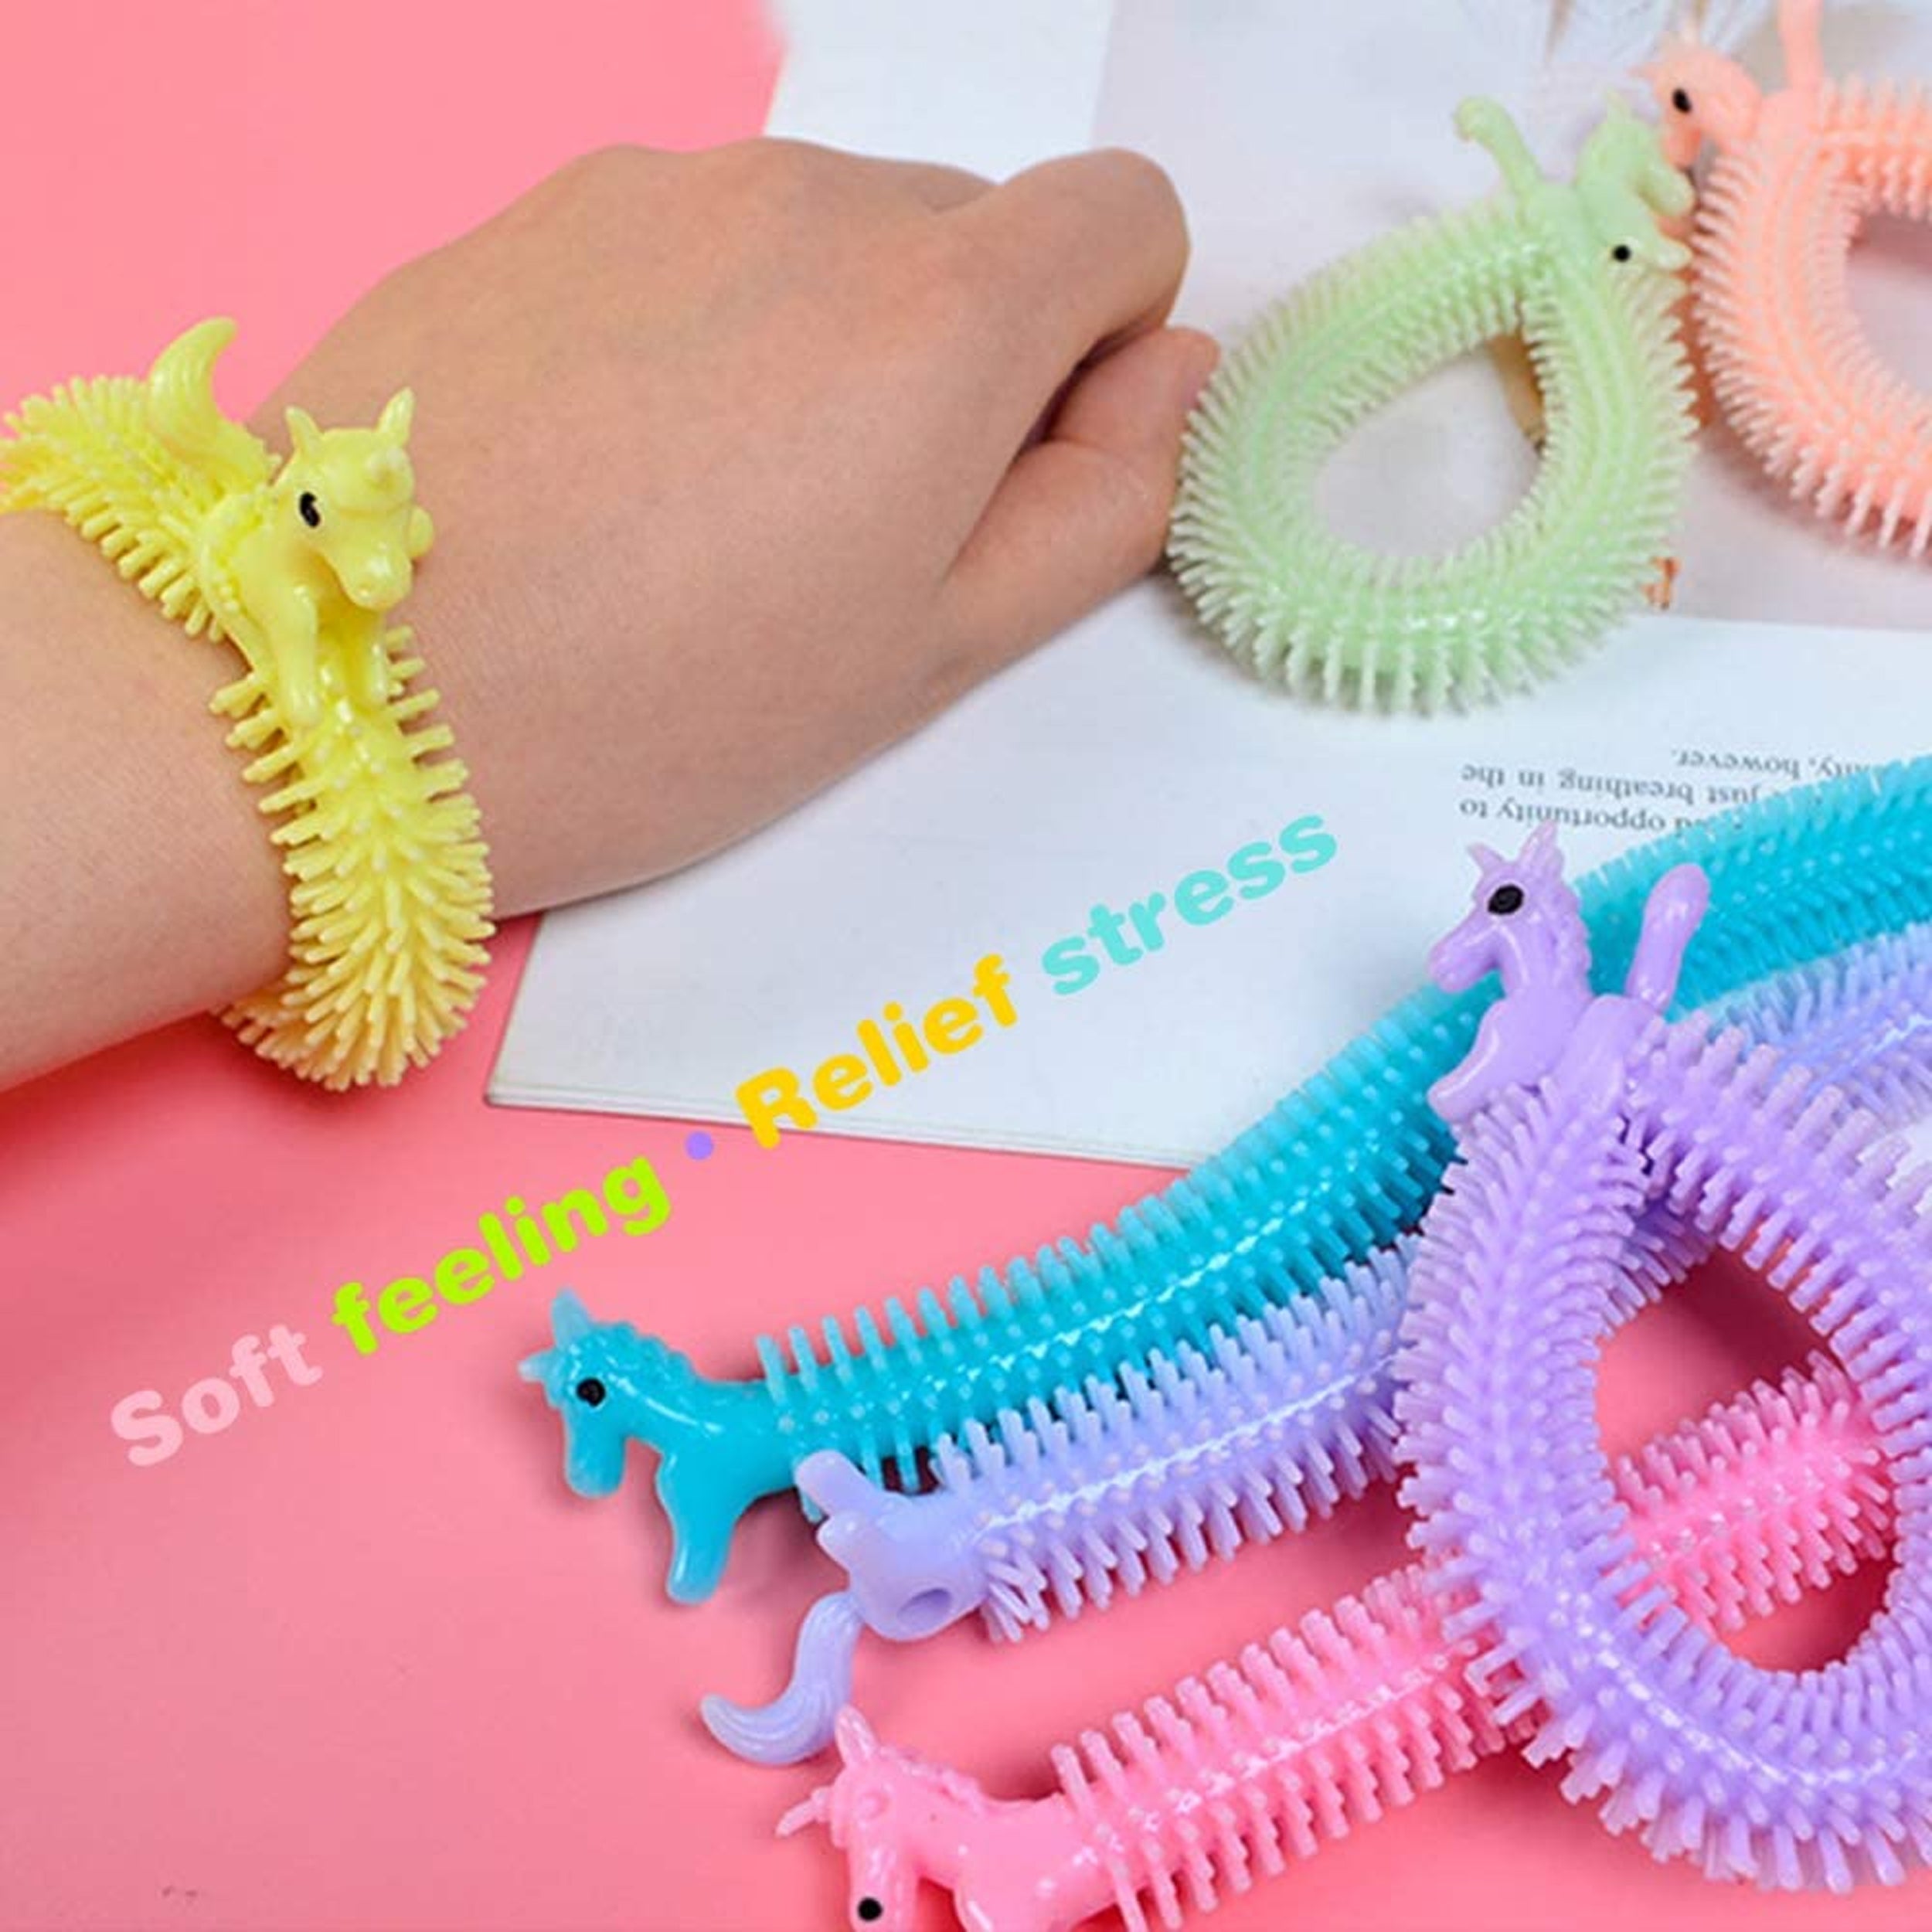 Features Of Rubber Stretchy String